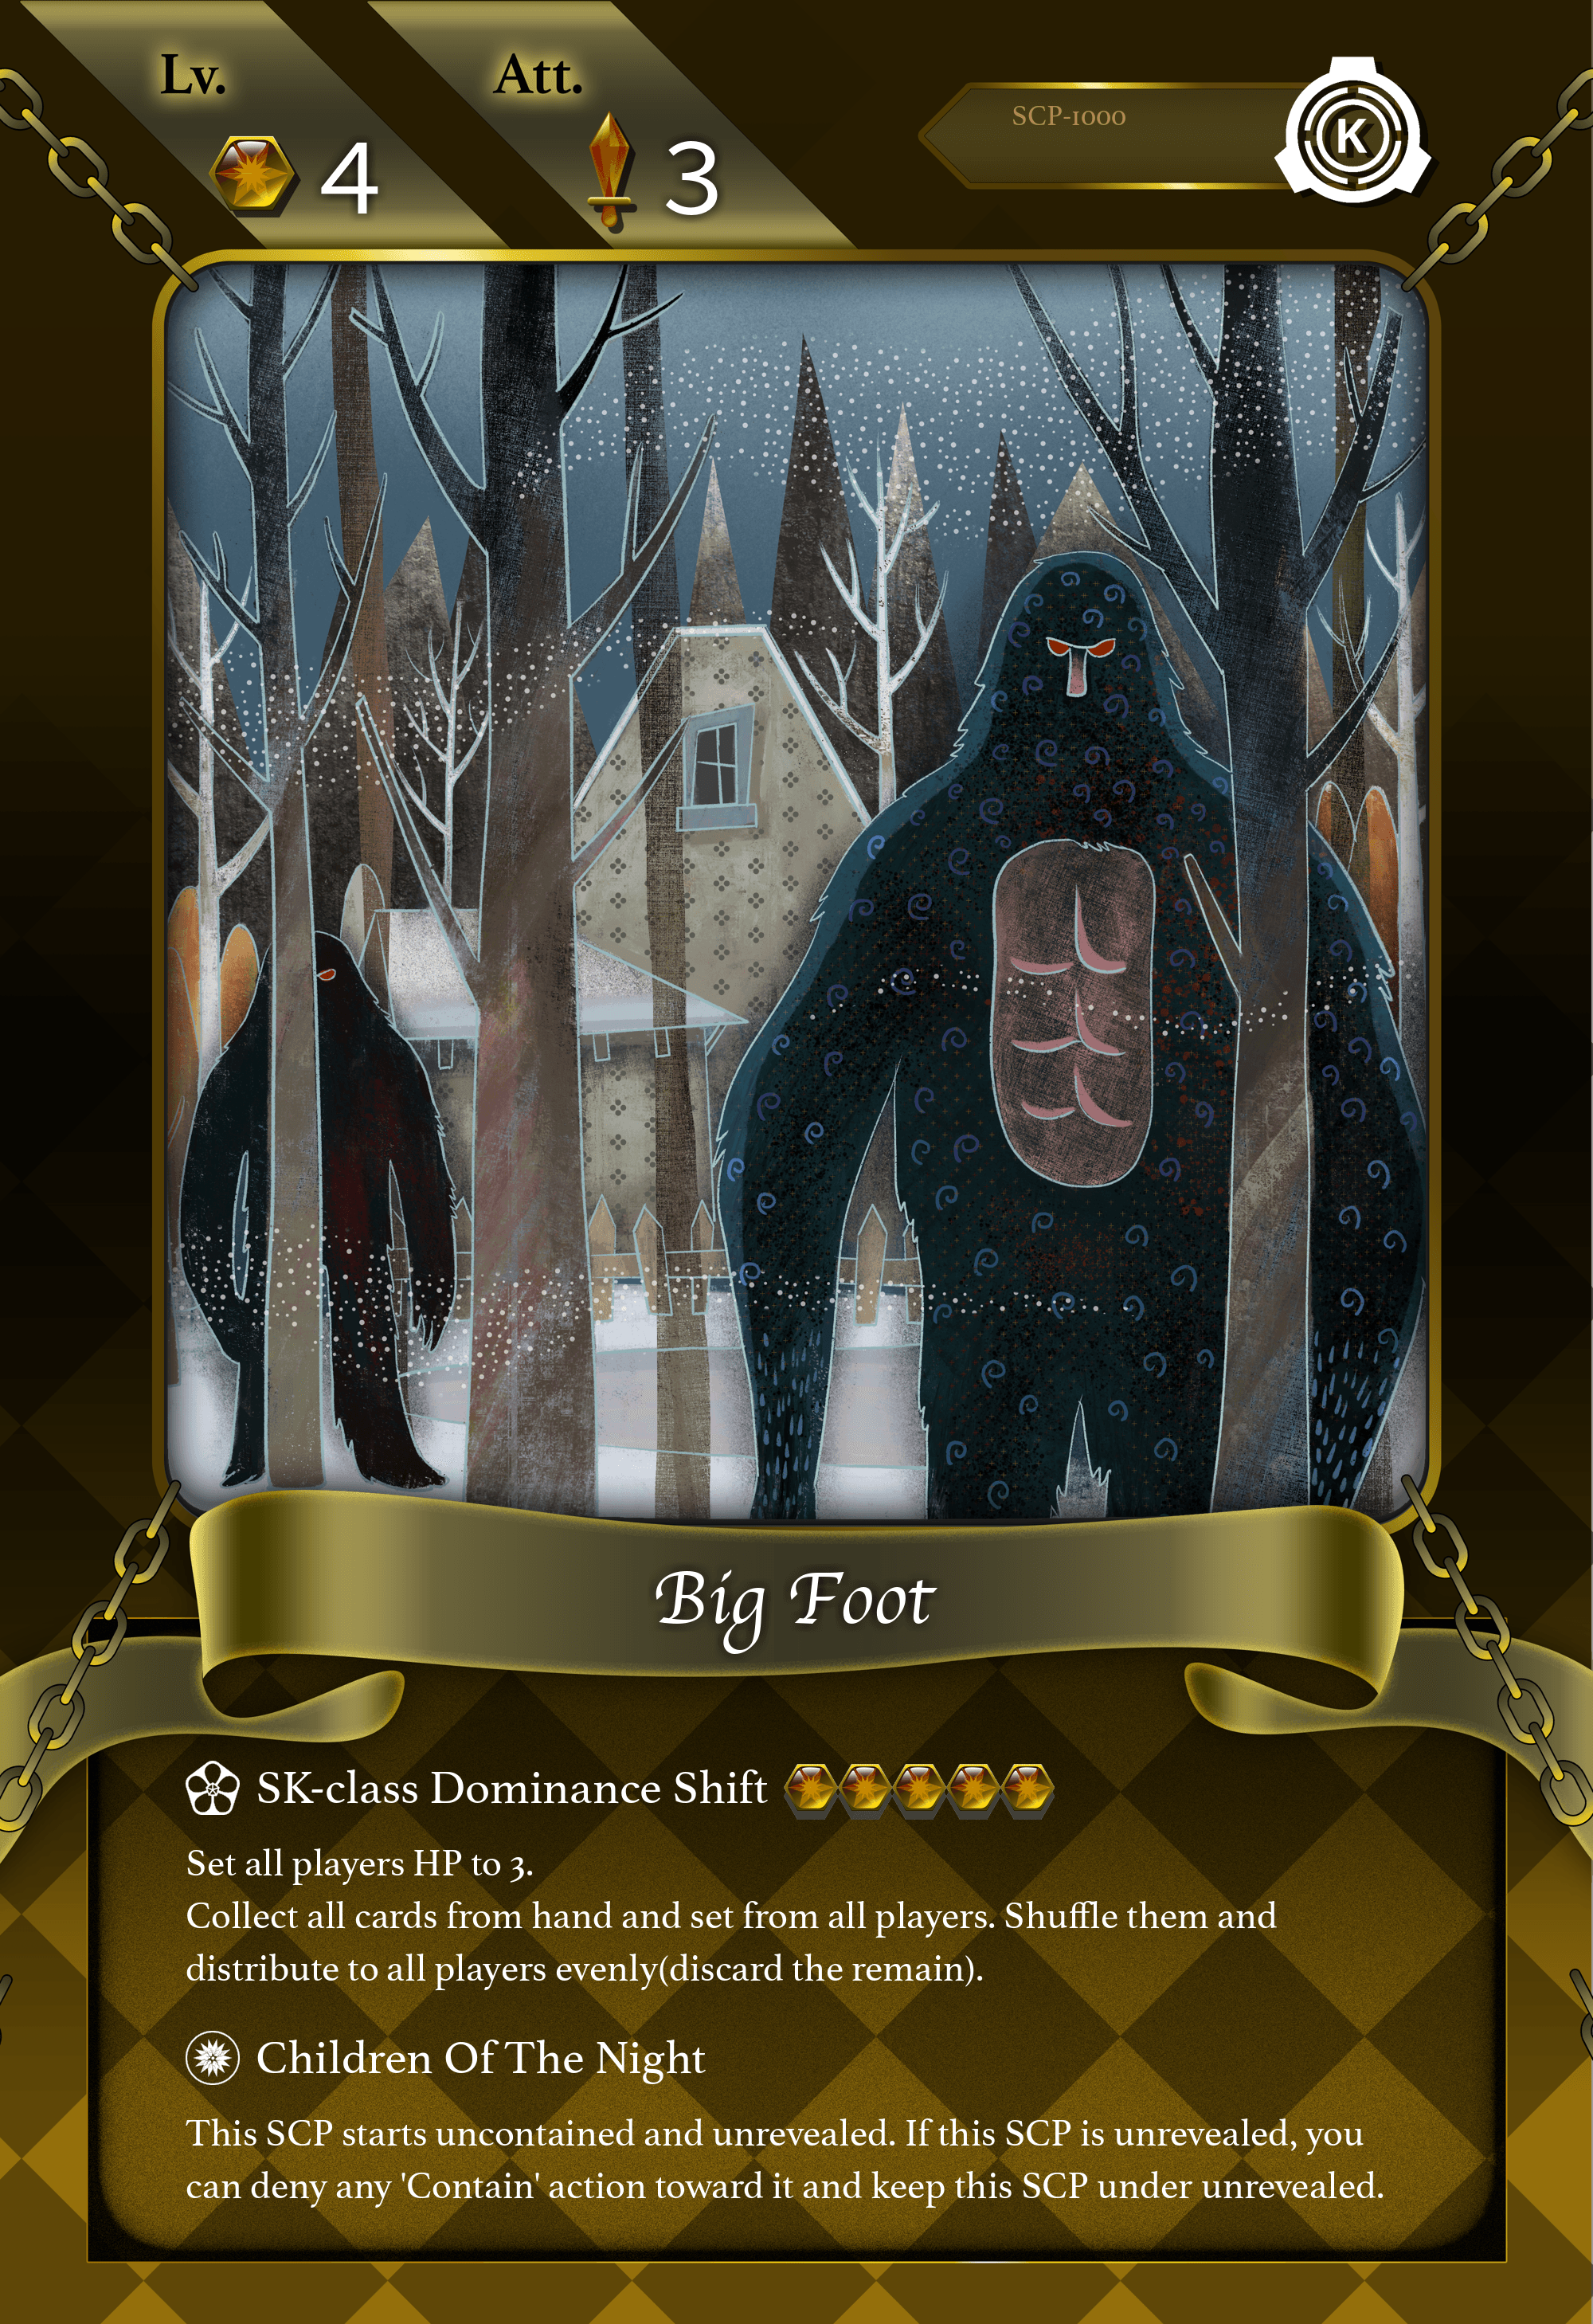 SCP-1000] Big Foot - SCP: End of Magic - Official Card Game